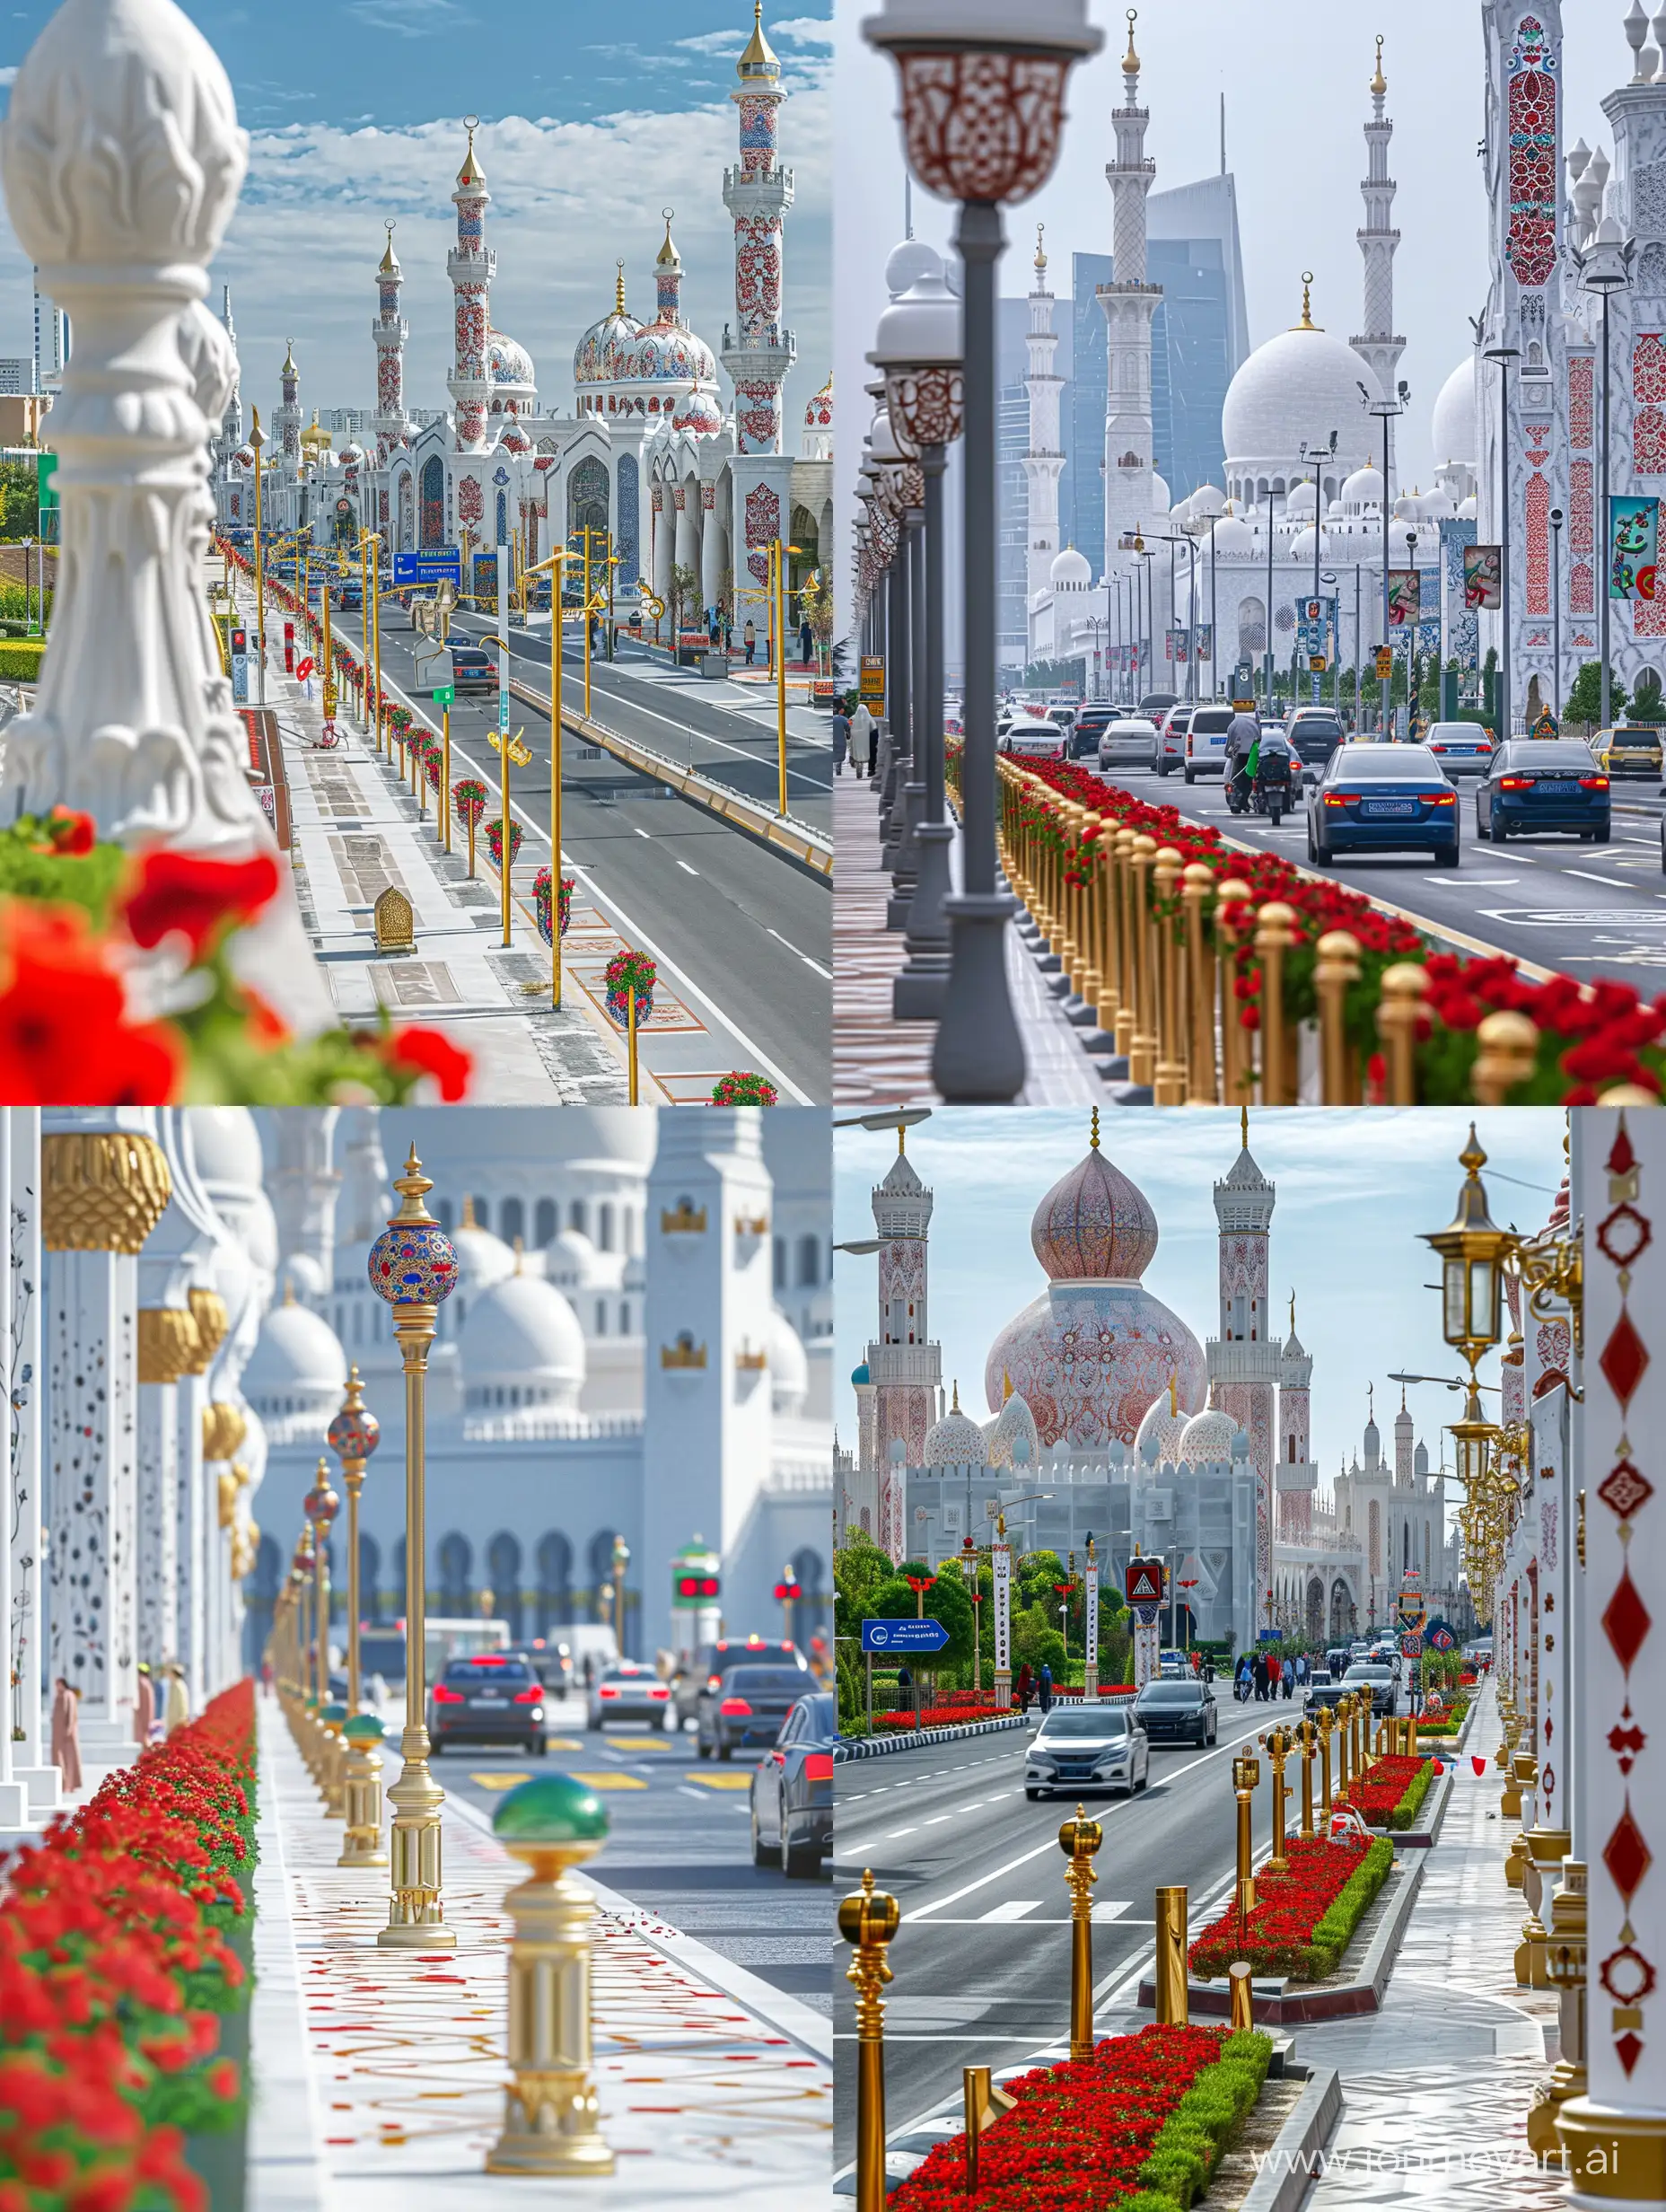 Islamic-Architecture-Cityscape-with-Vibrant-Traffic-and-Marbled-Sidewalks